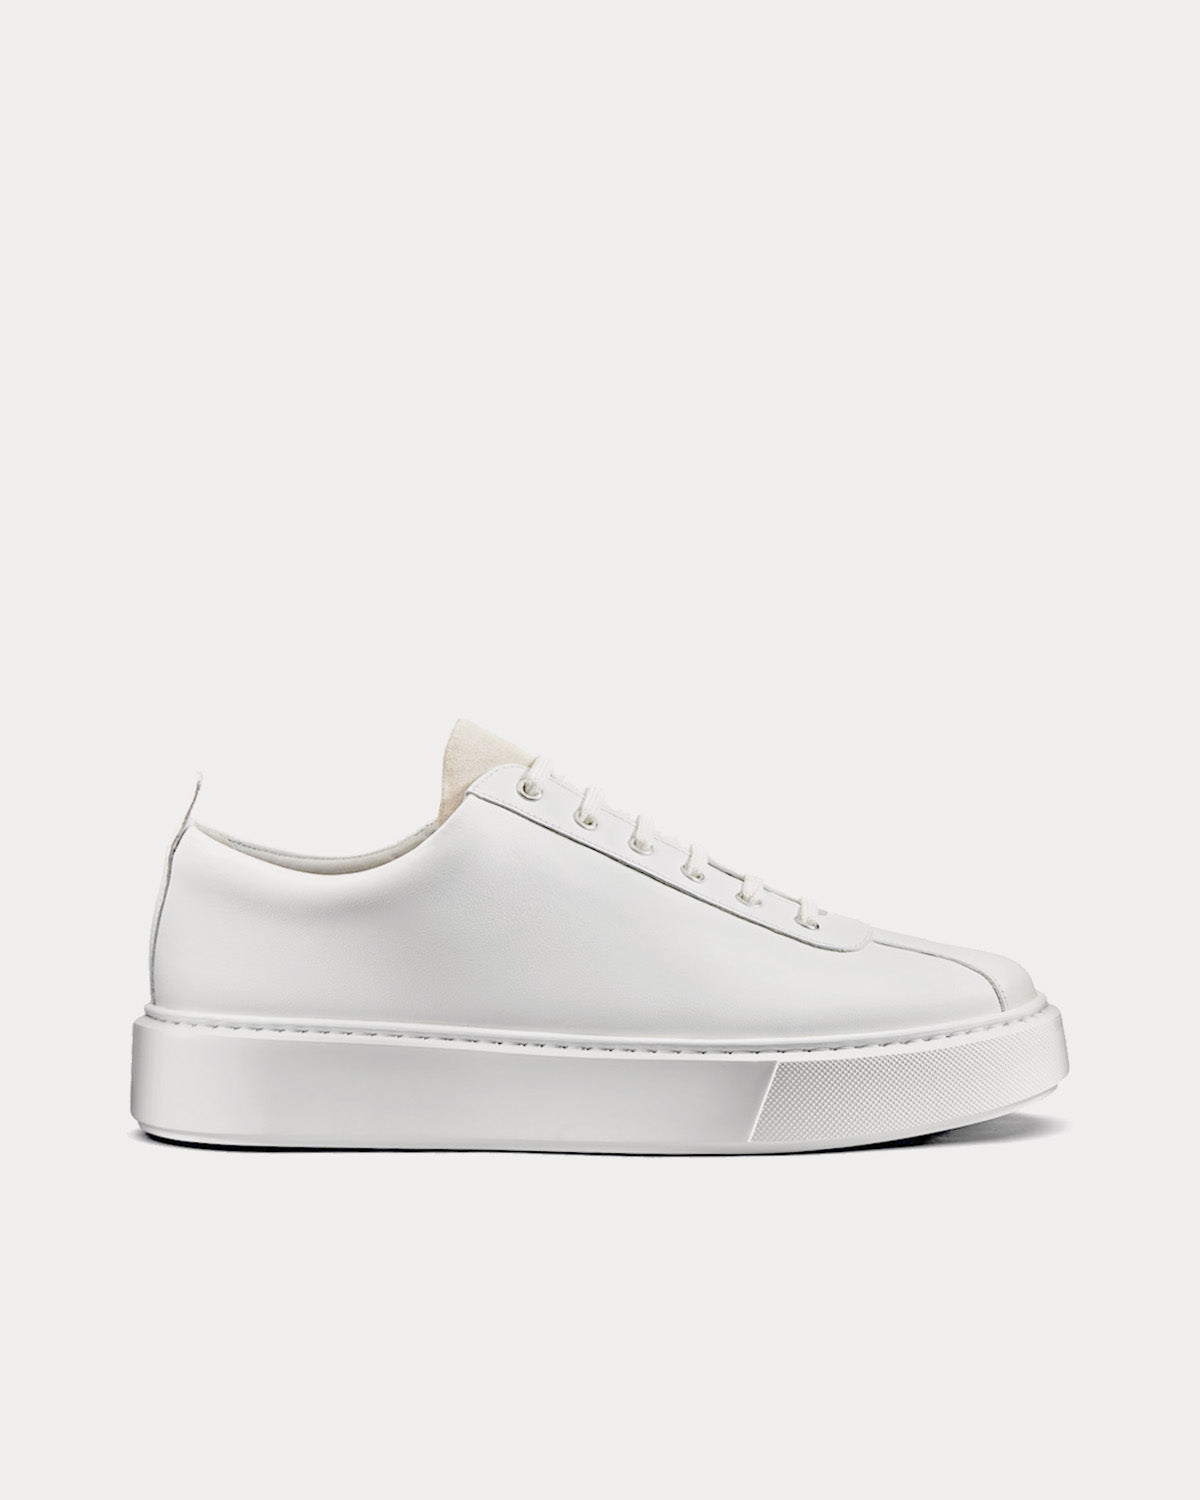 Grenson - Sneaker 30 Leather White Low Top Sneakers